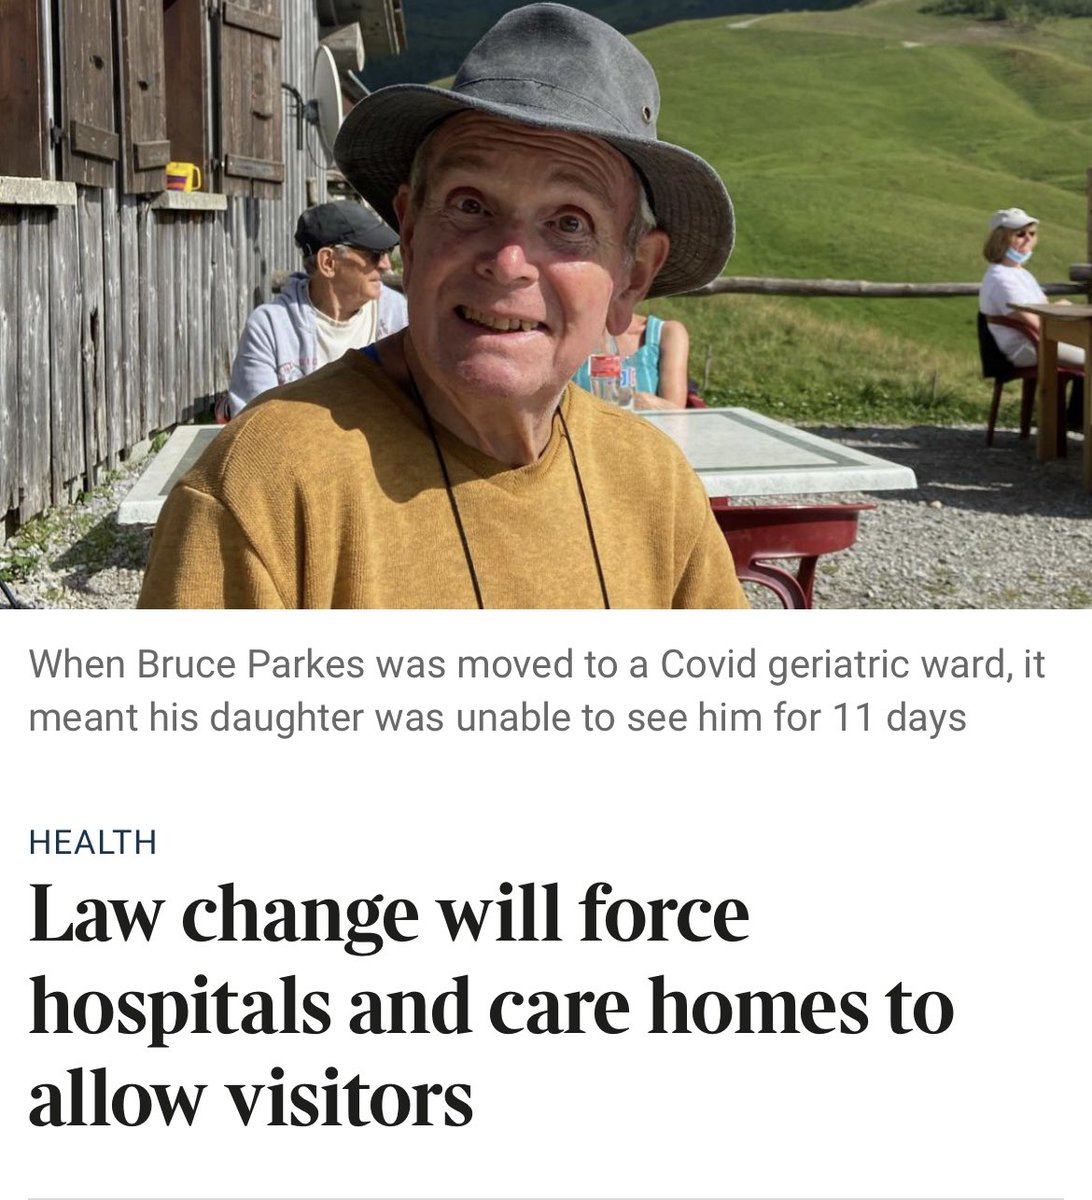 This week I will introduce legislation to Parliament seeking to protect visiting rights in care settings.

The #CareSupporter Bill is backed by campaigners, cross-party MPs and more than 70 charities.

I urge the Government to support it.

📖 Read more: thetimes.co.uk/article/f02ad0…